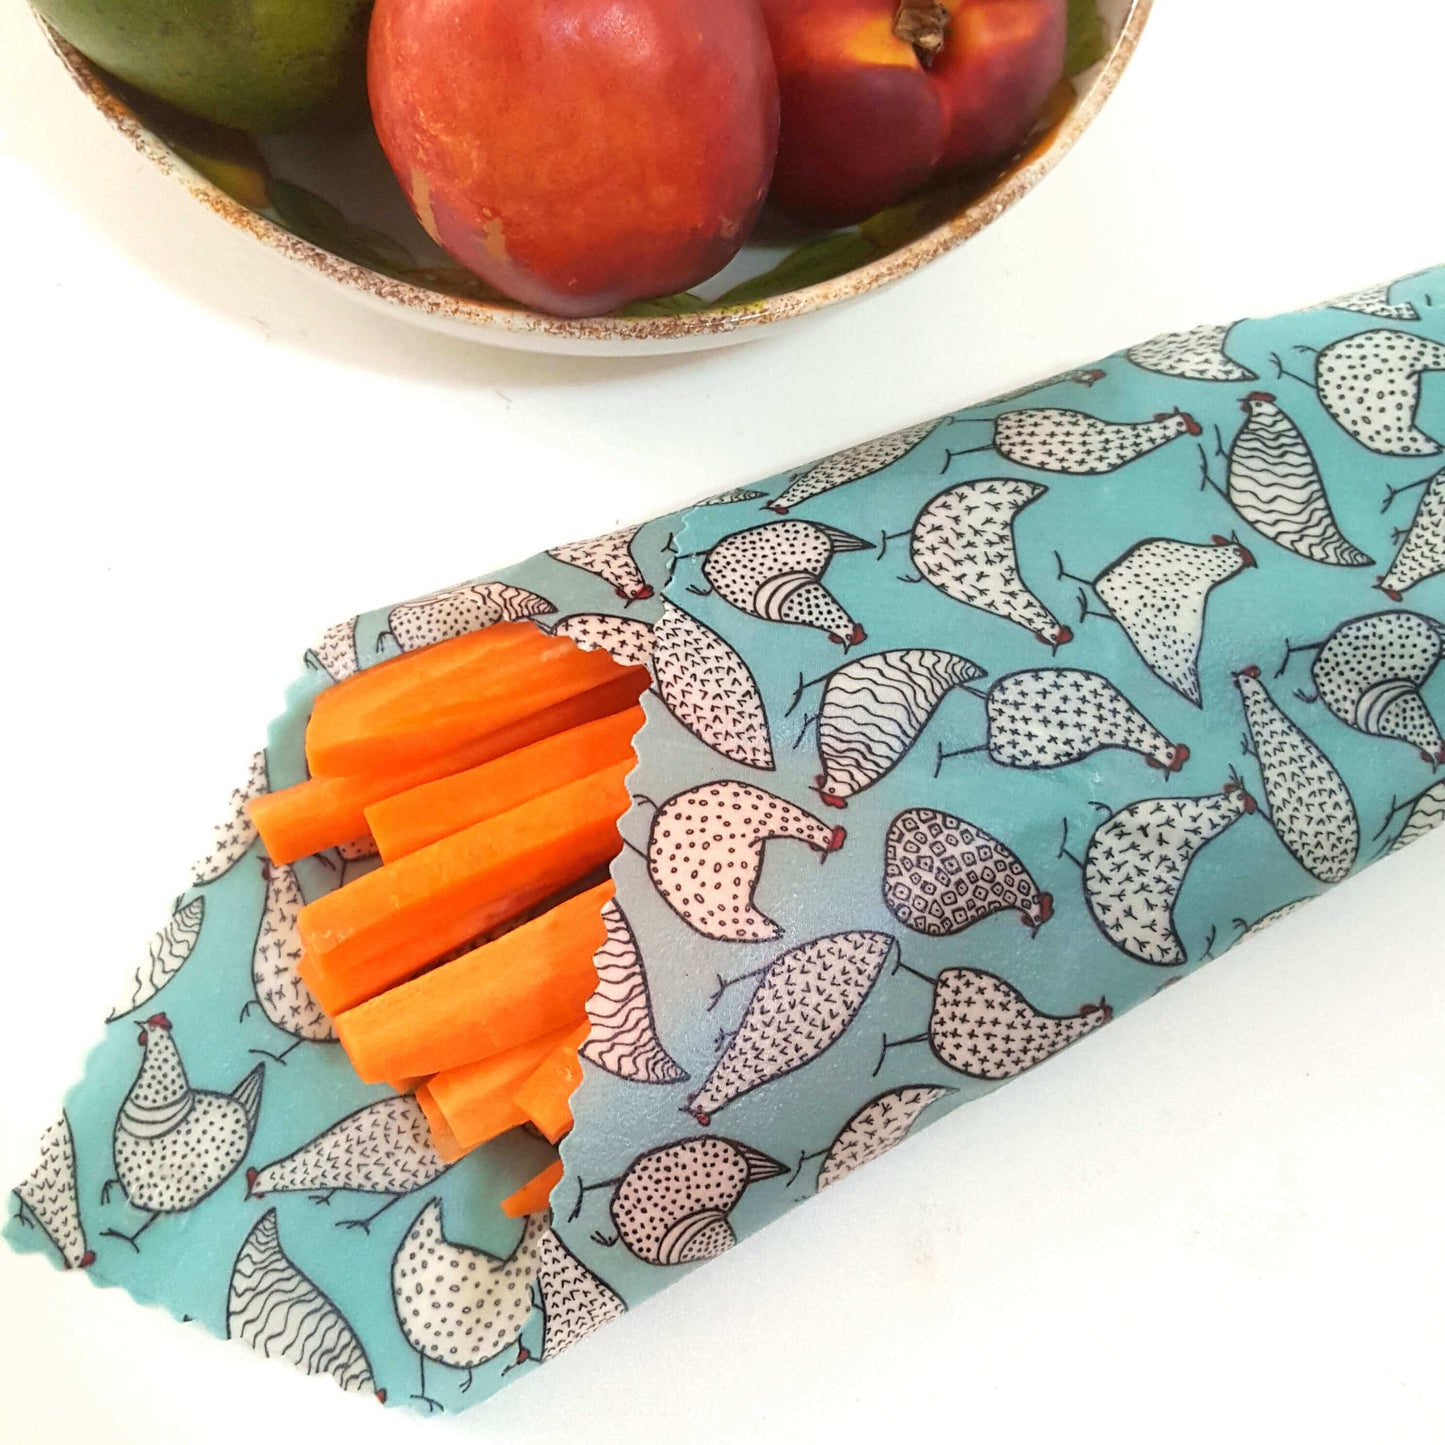 Reusable Beeswax Food Wraps 100% Hand Made in the UK by Honey Bee Good. Planet-Kind single large beeswax wrap in Happy Hens pattern as flatlay with carrots